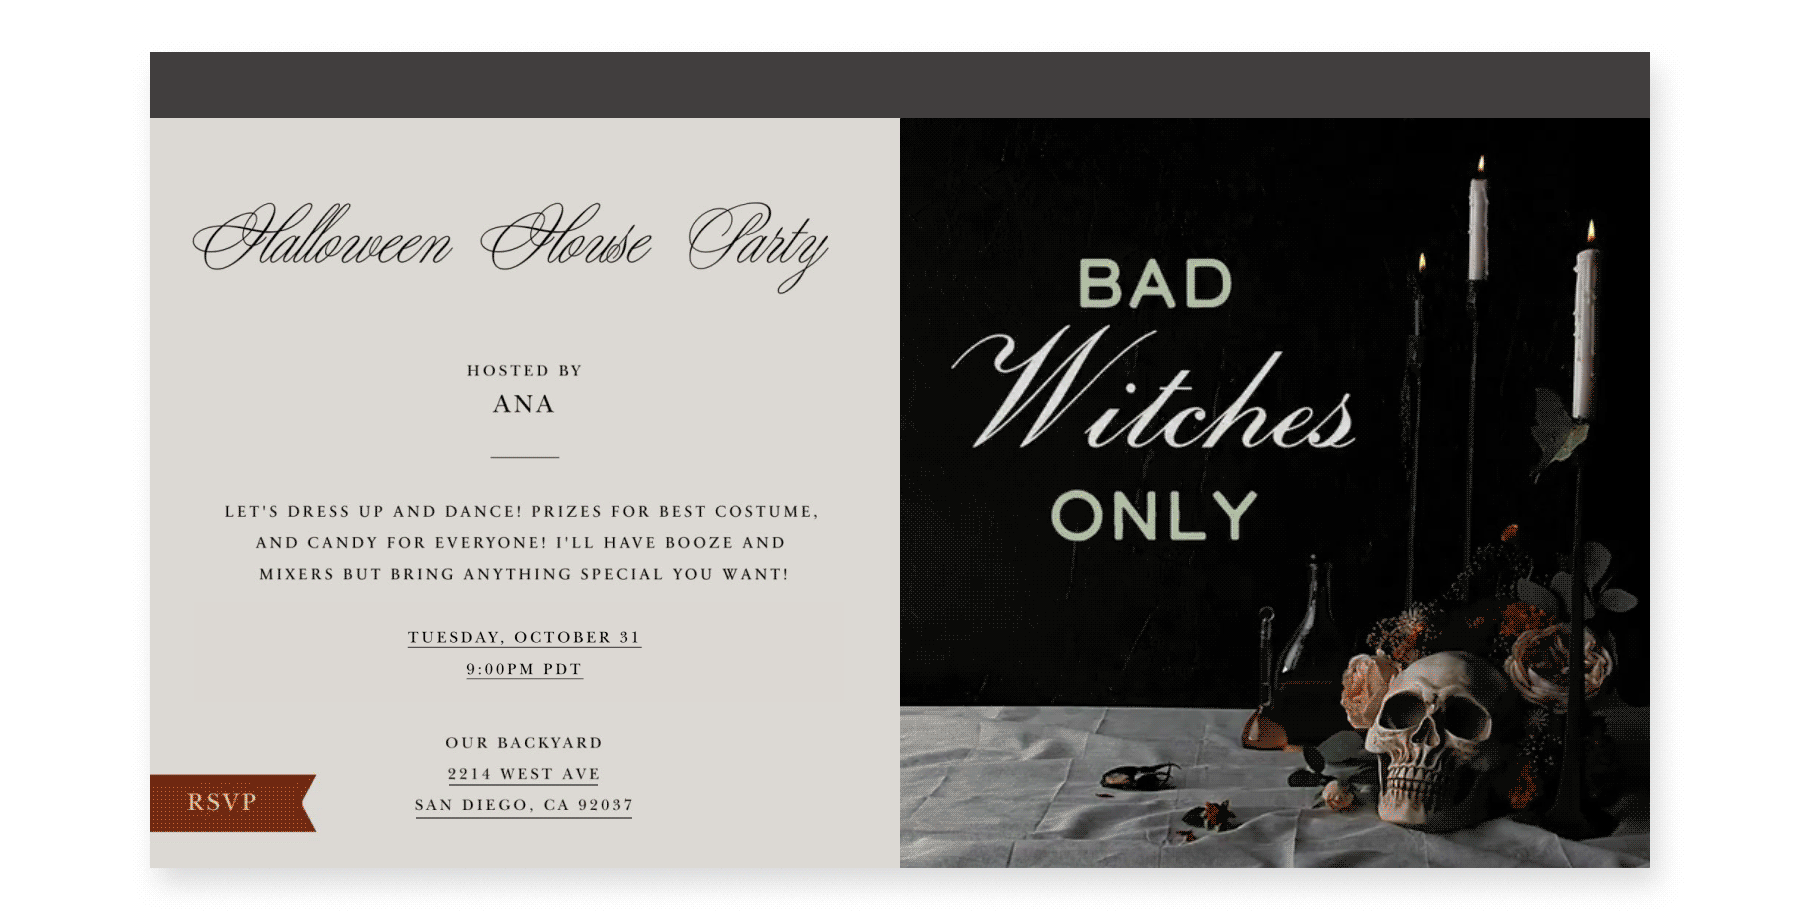 An online invite for a Halloween House Party has a dark, moody image of a flower and candle arrangement with a skull and flickering flames with the words “Bad Witches Only.”